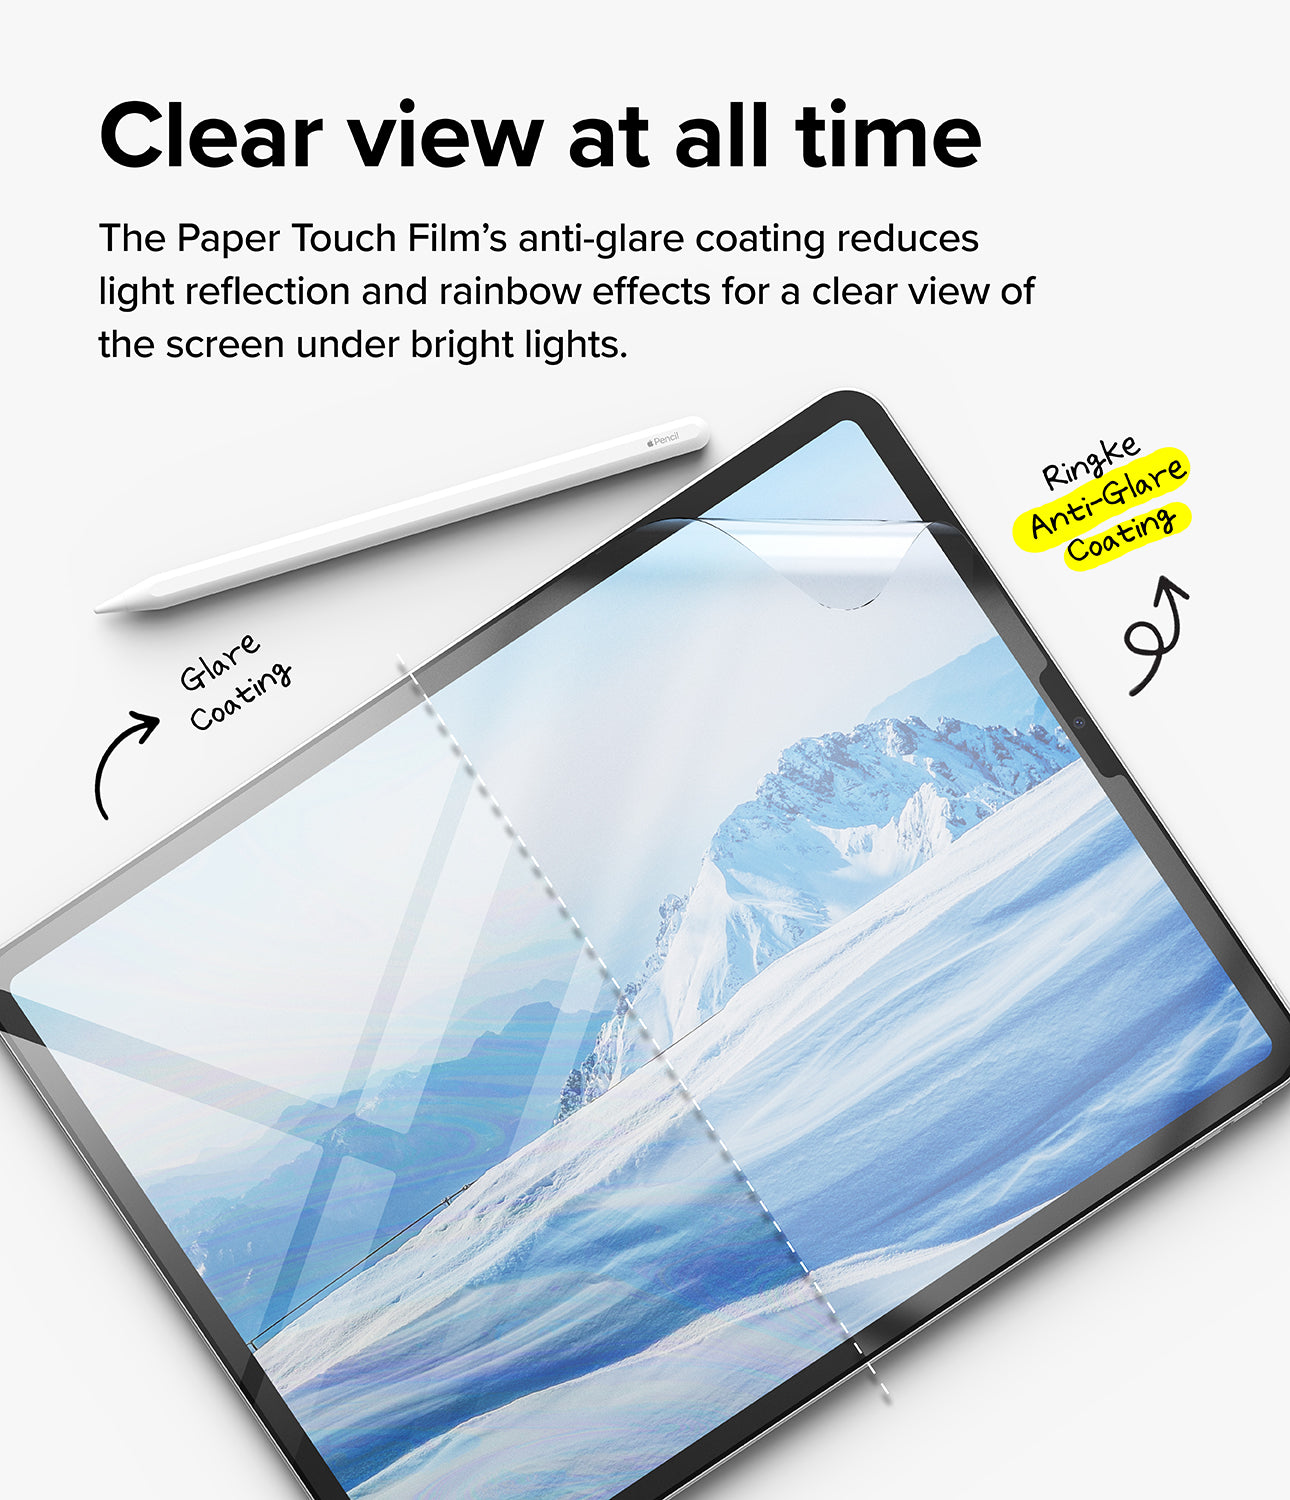 iPad Pro 13" (M4) Screen Protector | Paper Touch Film - Soft - Clear View At All Time. The Paper Touch Film's anti-glare coating reduces light reflection and rainbow effects for a clear view of the screen un der bright lights.